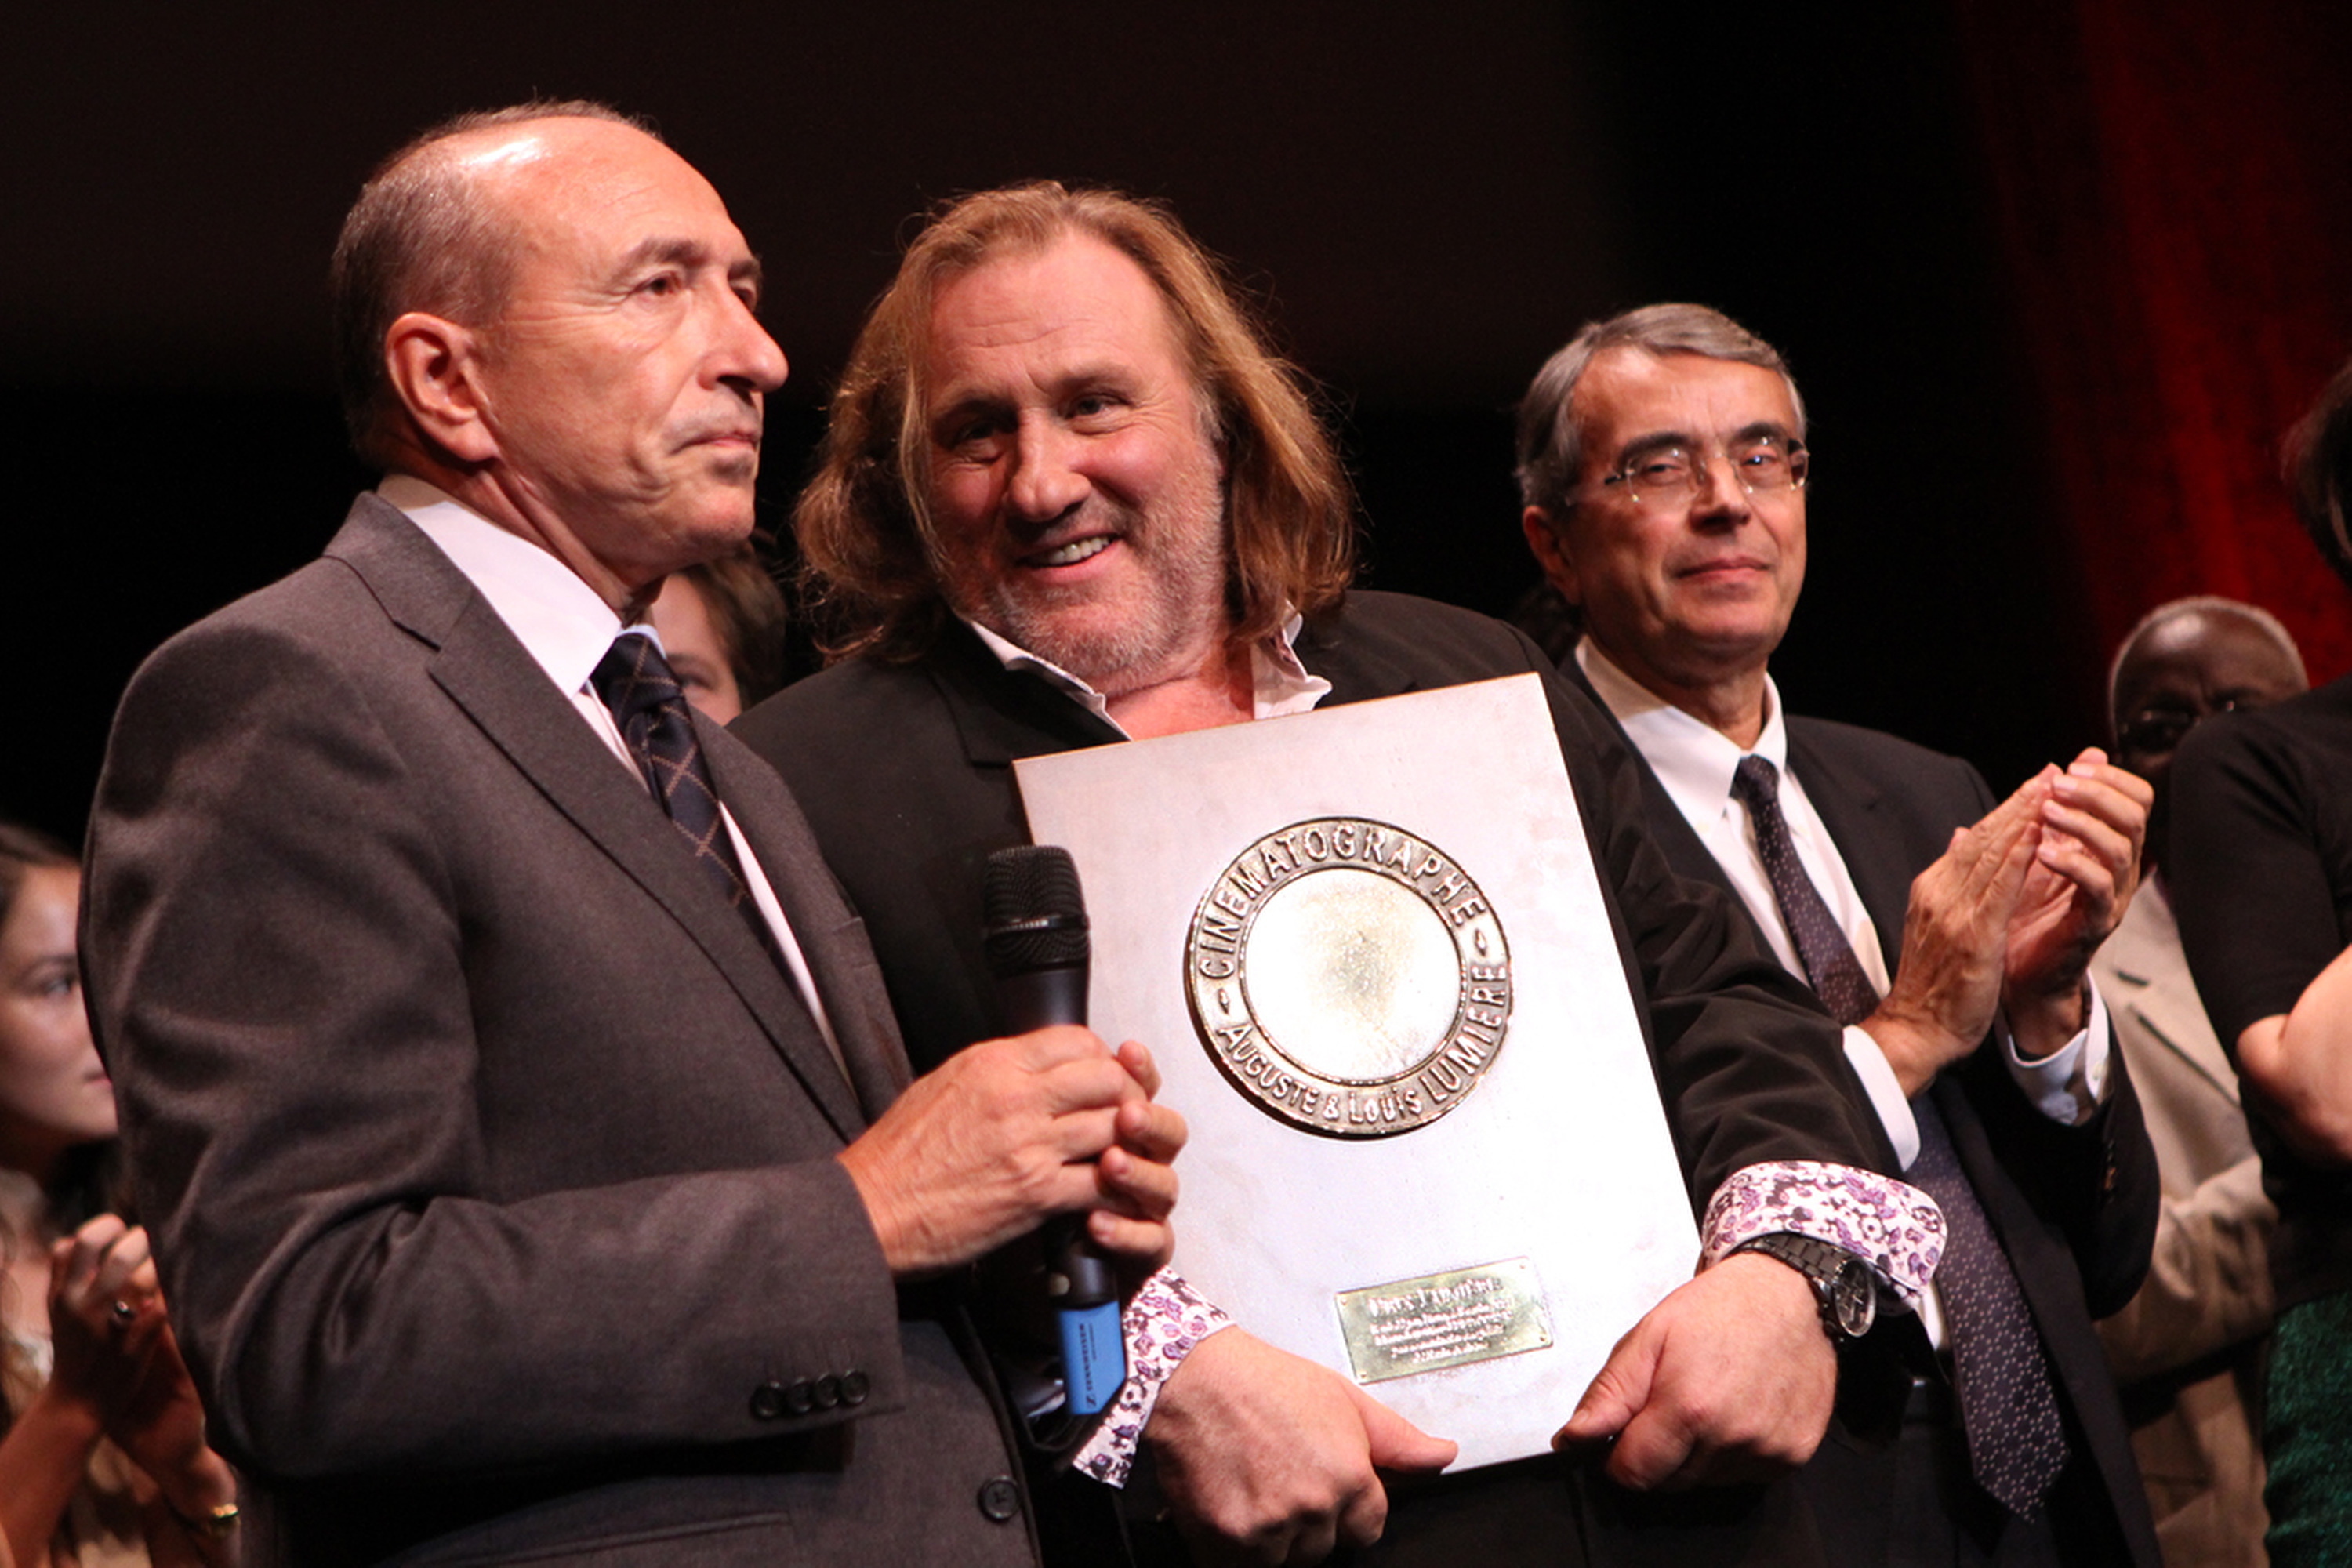 Gerard Depardieu awarded the Prix Lumiere for his career achievements | Picture 99866